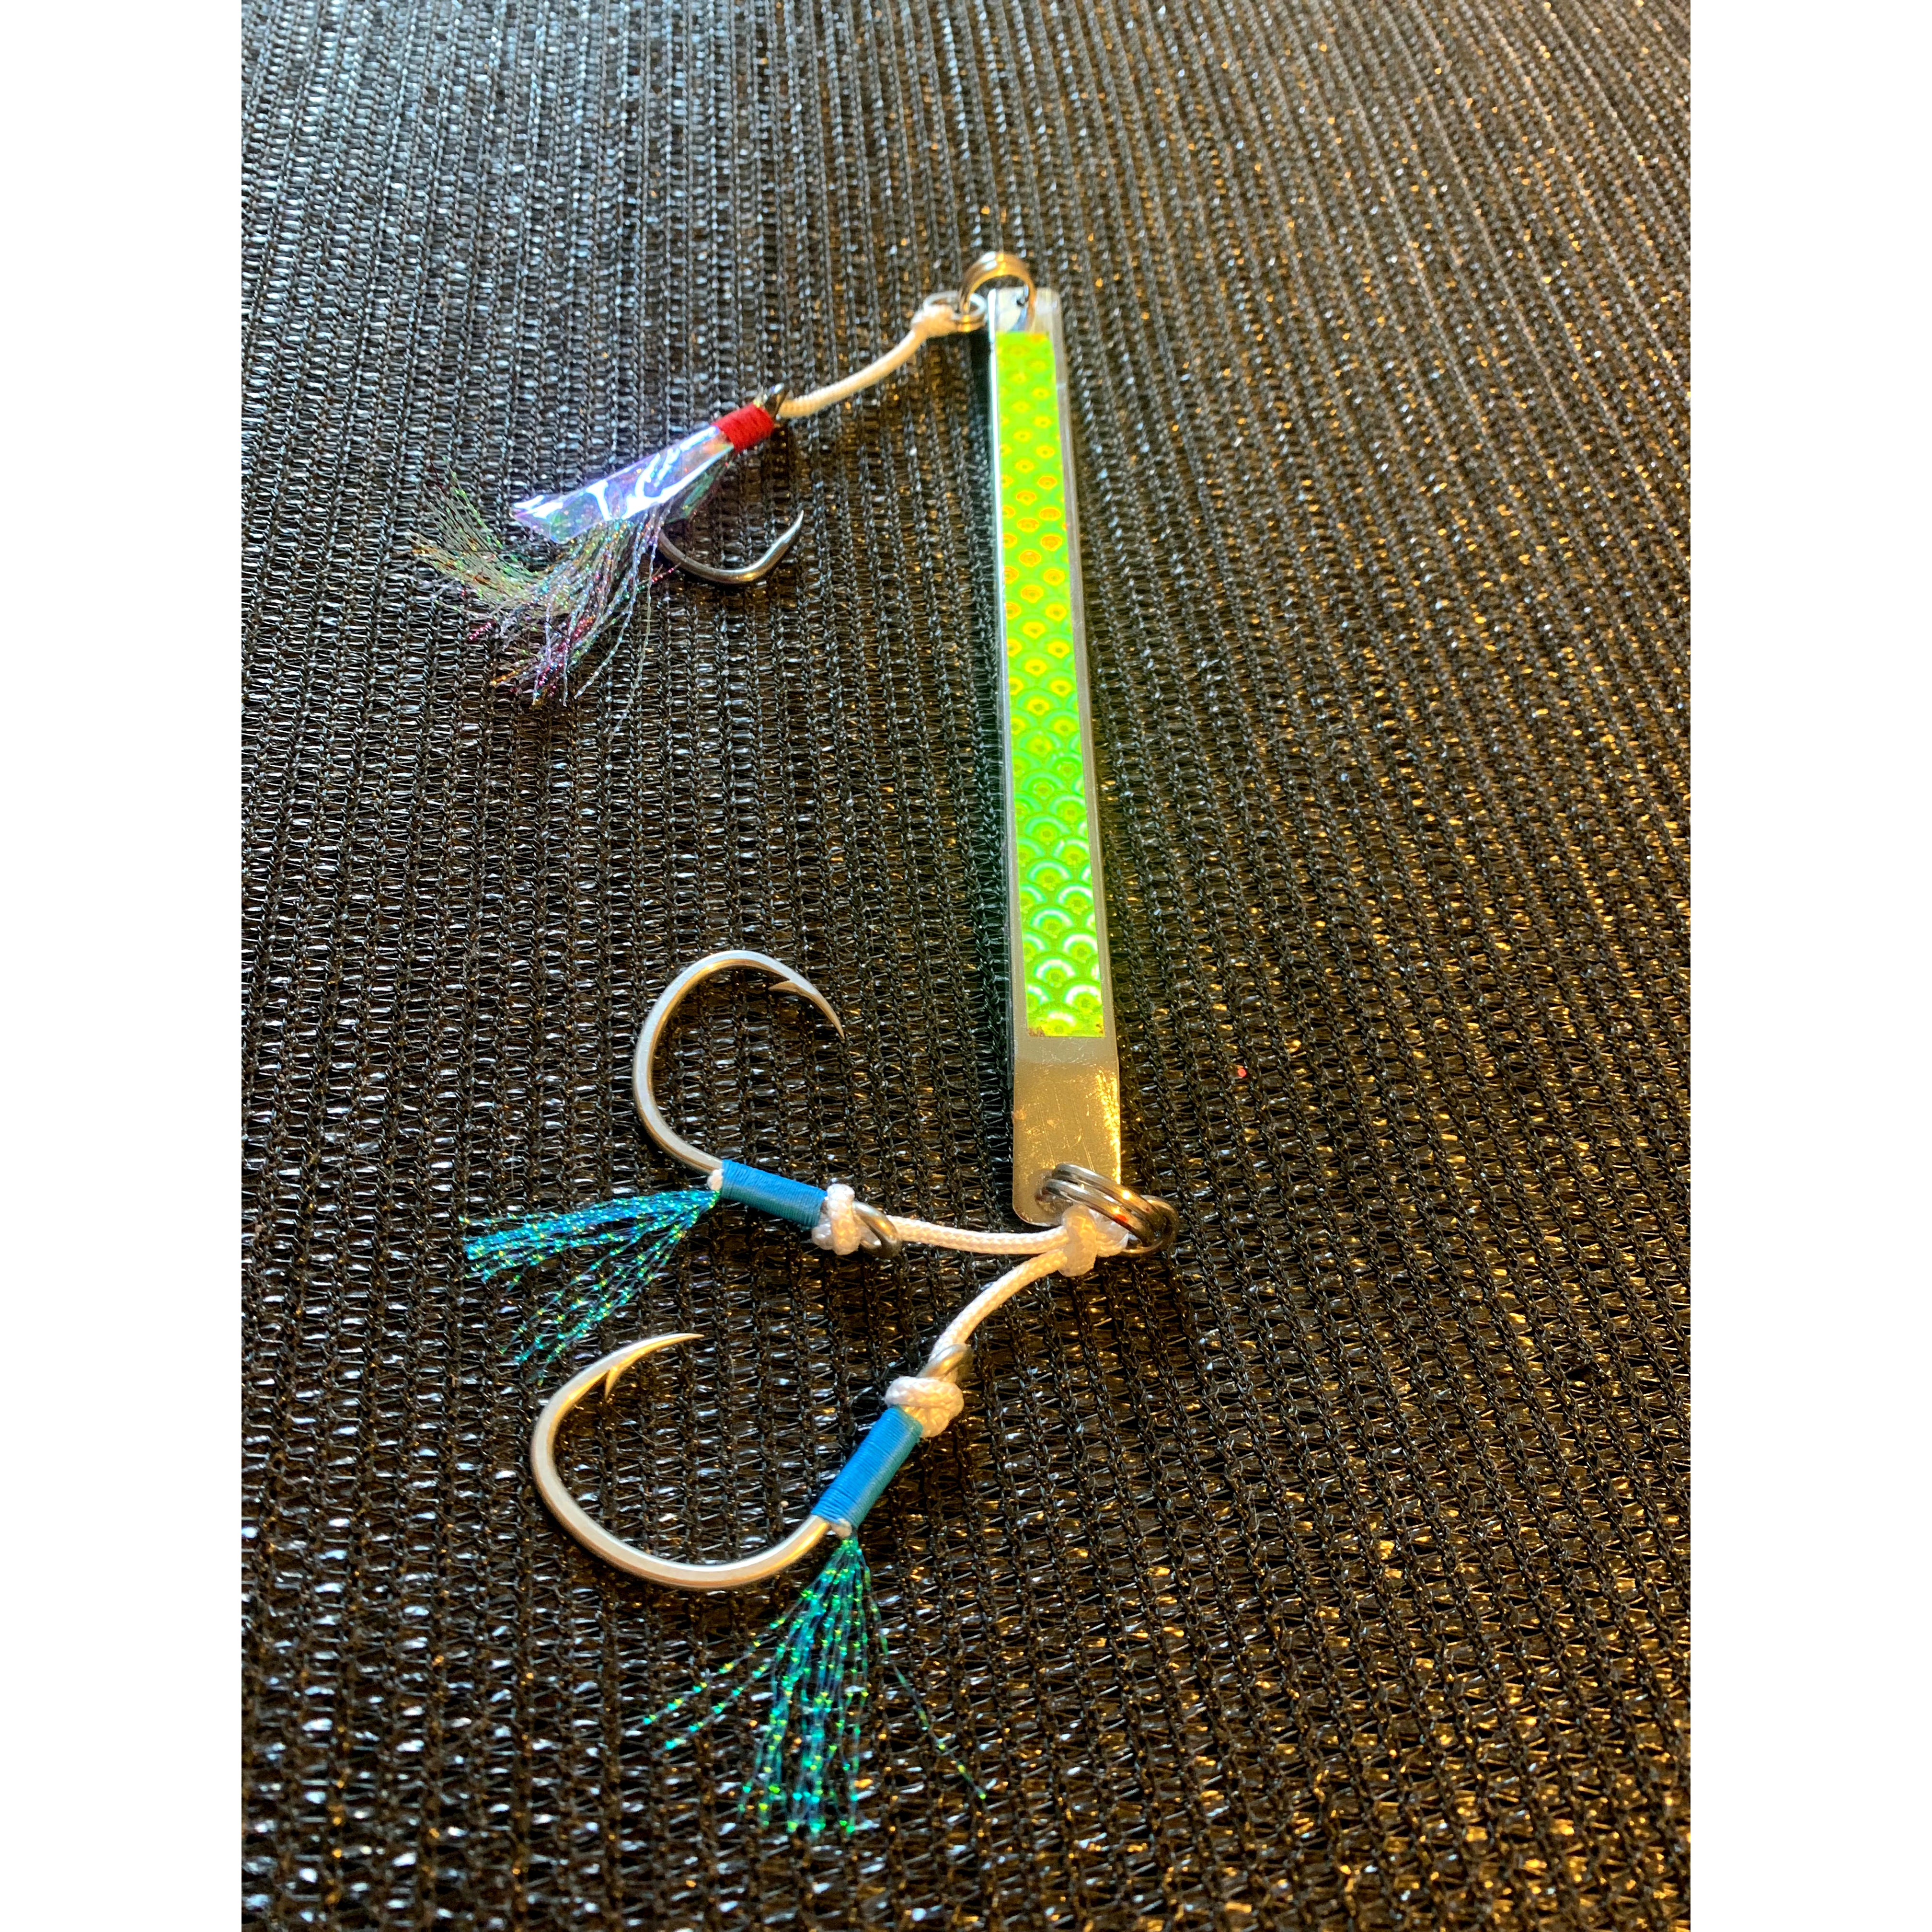 Fishing Metal Hand Made Jig Lures 180mm 127g